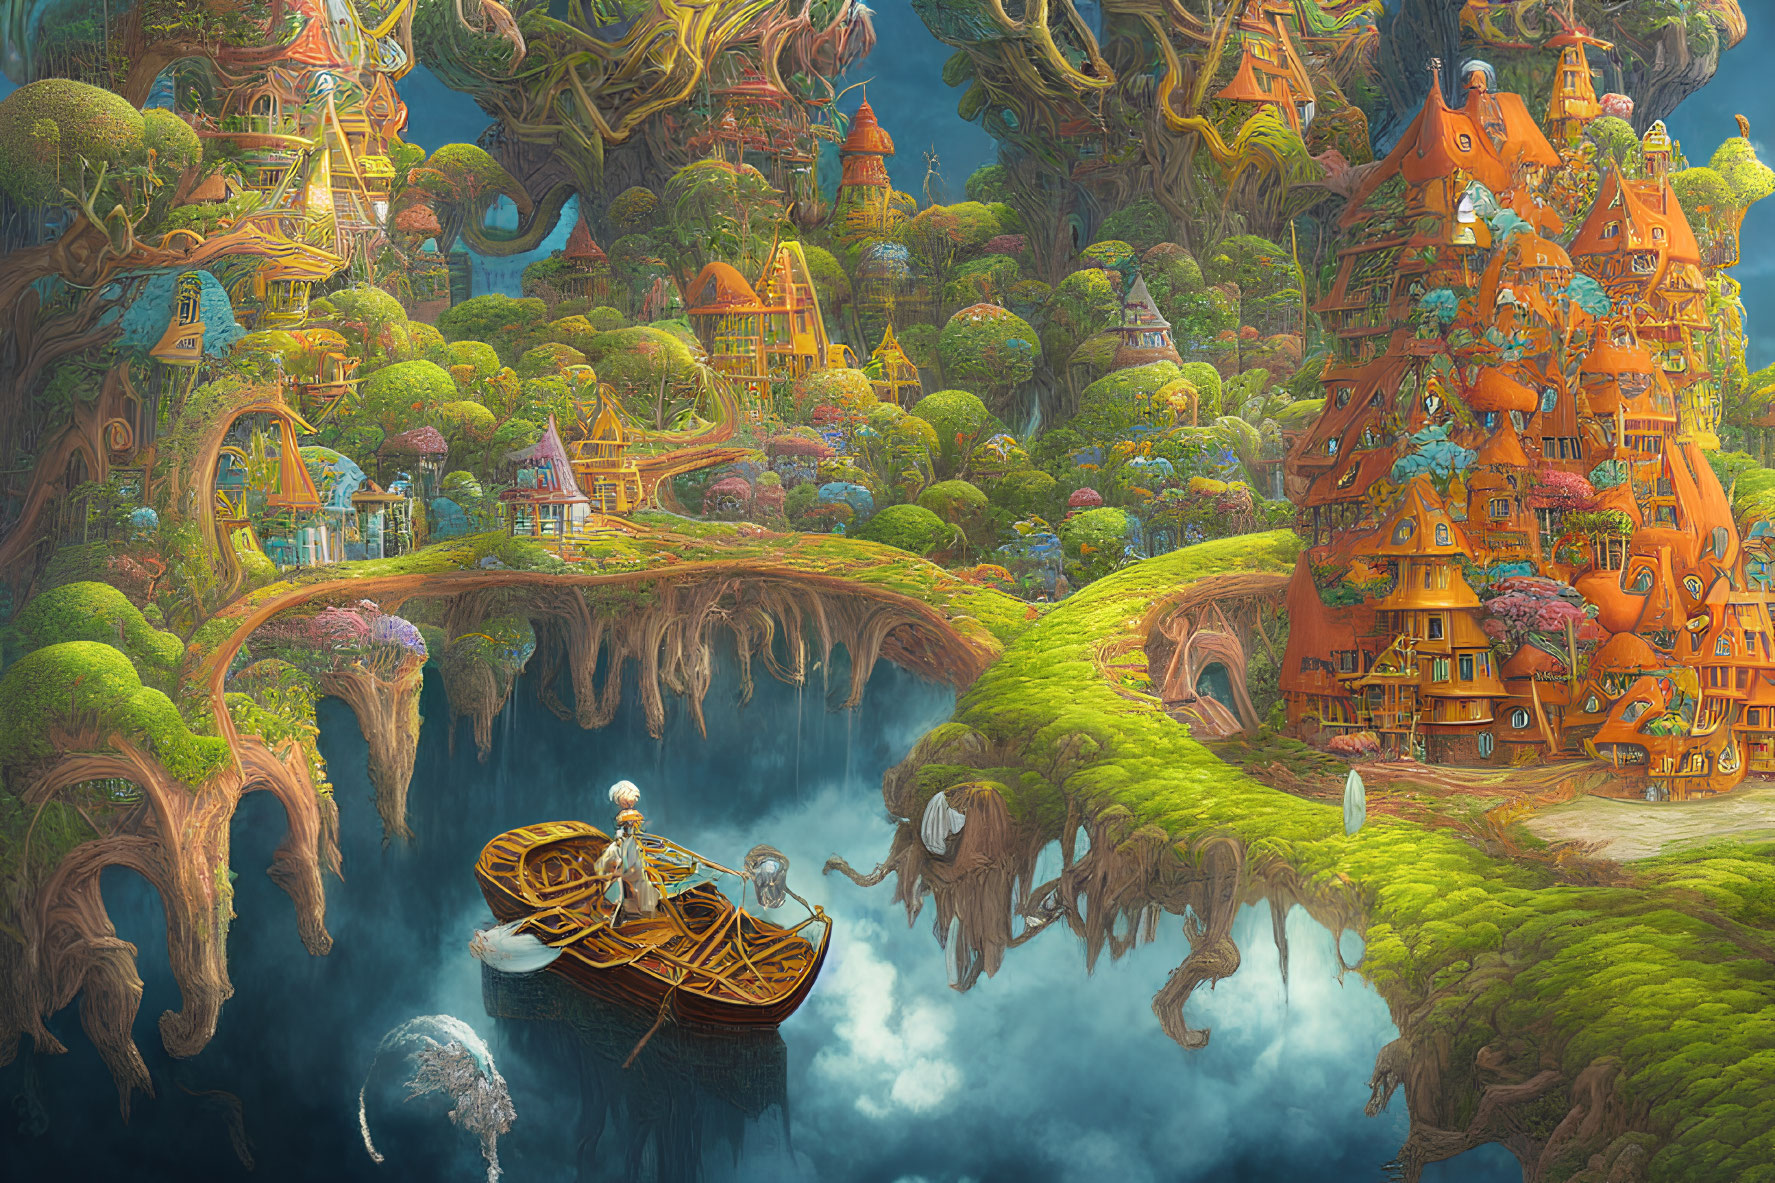 Vibrant fantasy landscape with whimsical tree-like structures and floating islands